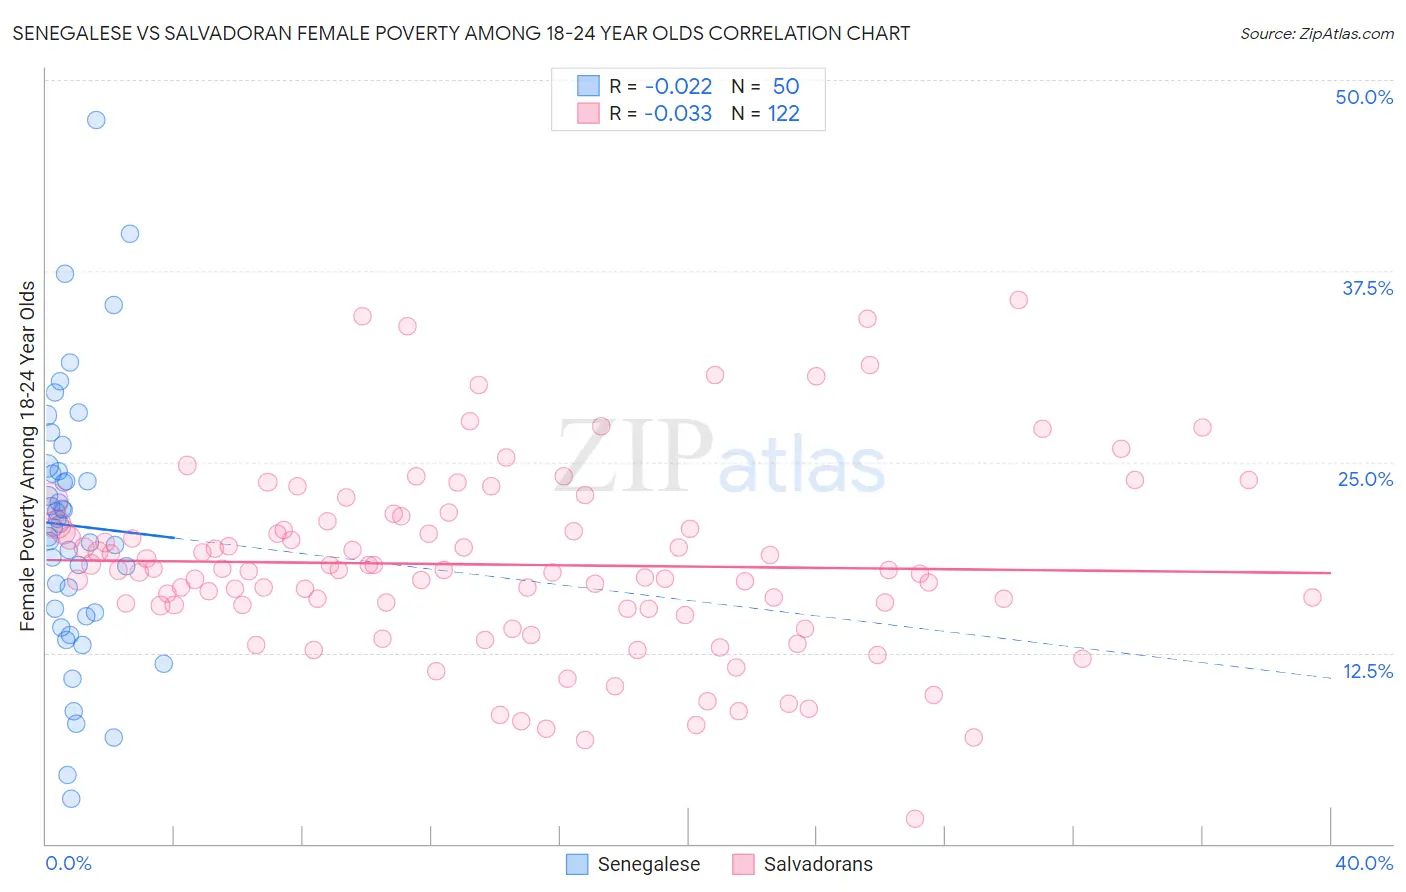 Senegalese vs Salvadoran Female Poverty Among 18-24 Year Olds